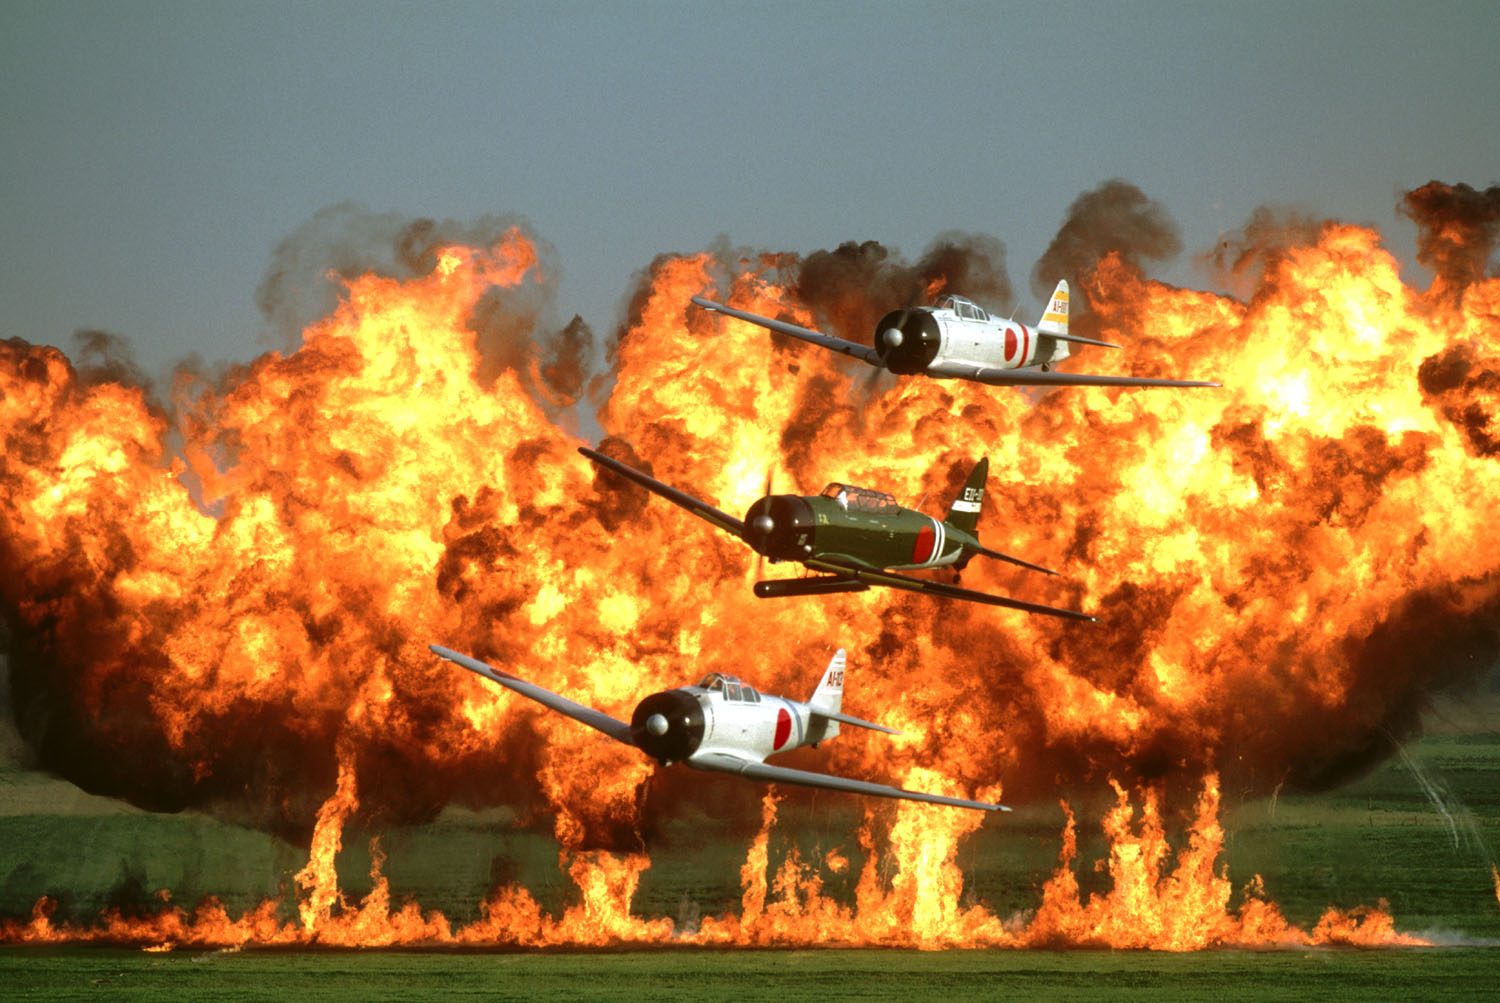 Aircraft from the CAF's famous Tora! Tora! Tora! display routine fly past the crowd as pyrotechnics fill the air to their rear! (photo CAF Tora! Tora! Tora! team)